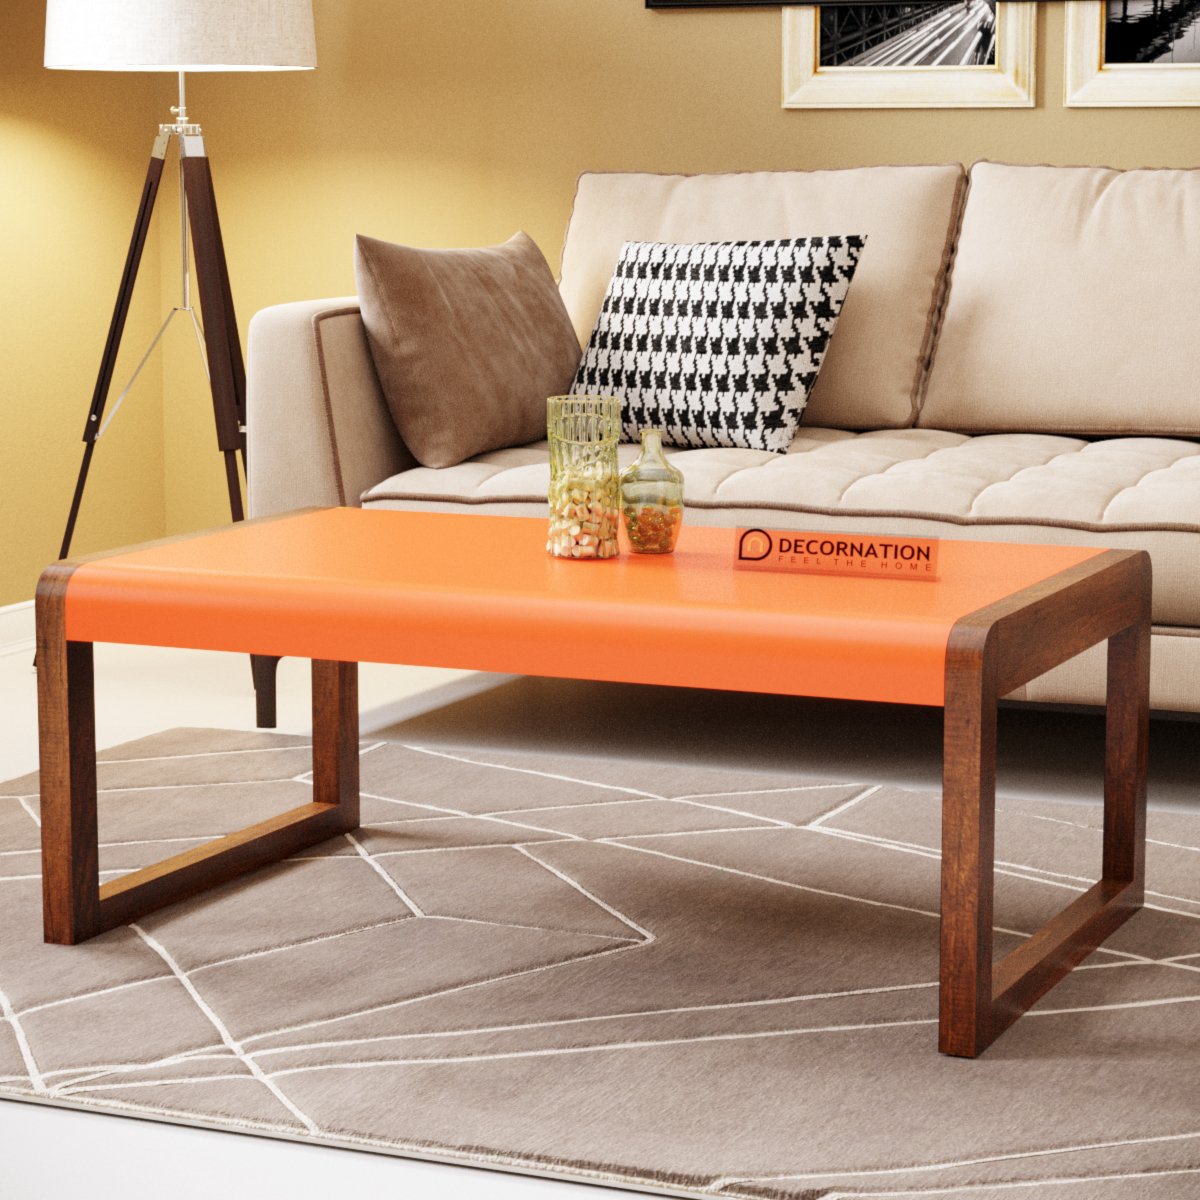 Amber Wooden Coffee Table for Living Room/Bedroom – Orange